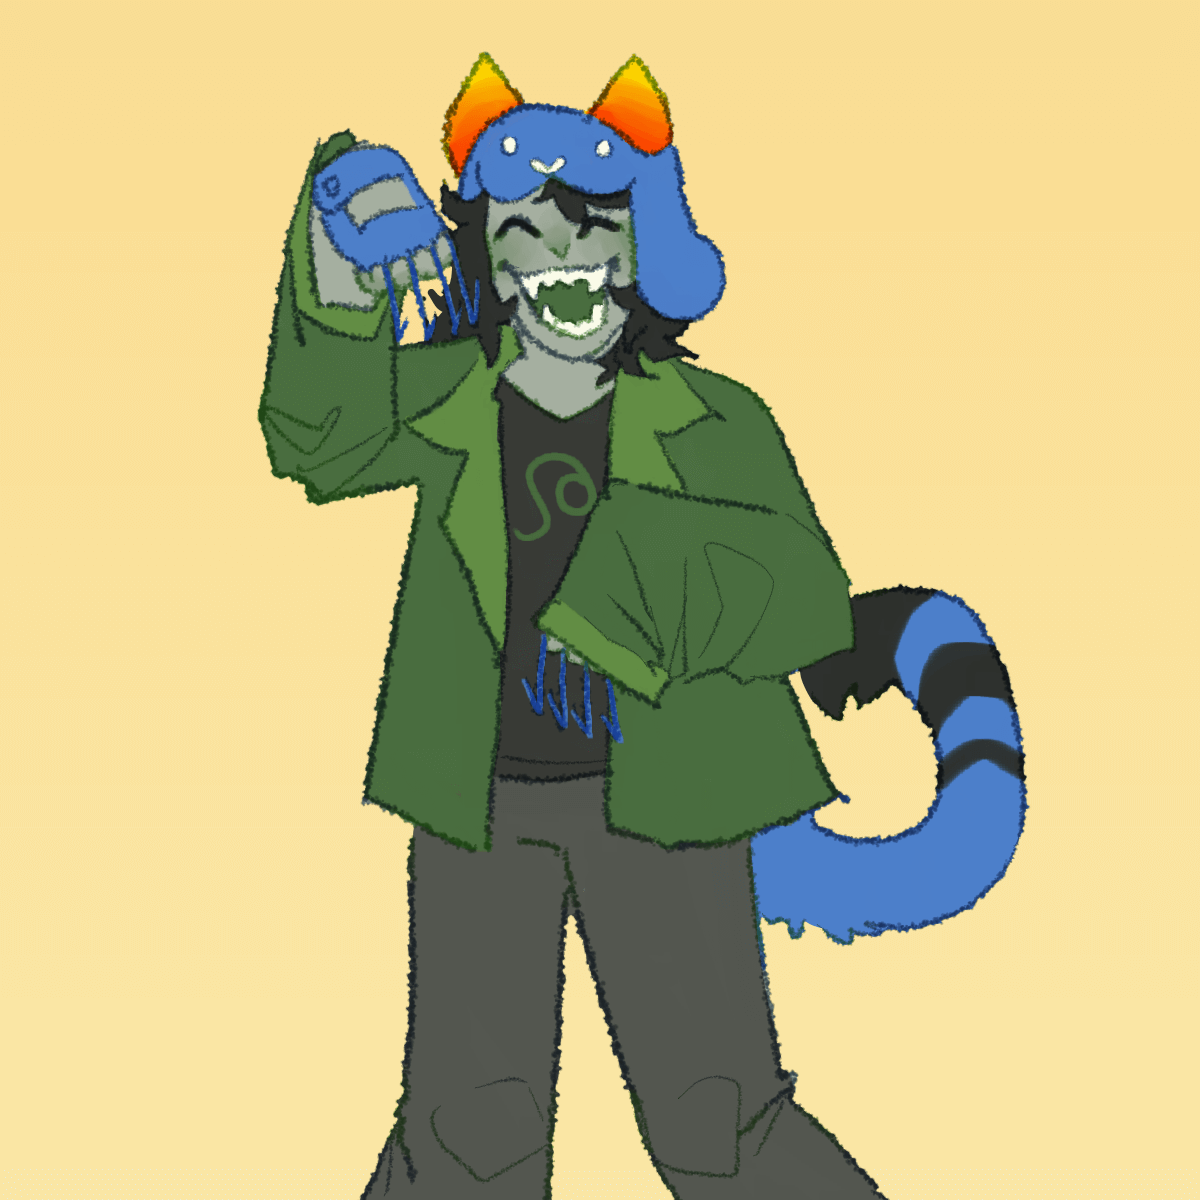 a drawing of nepeta from homestuck. she is smiling widely and has her hands held
		out in front of her like paws.